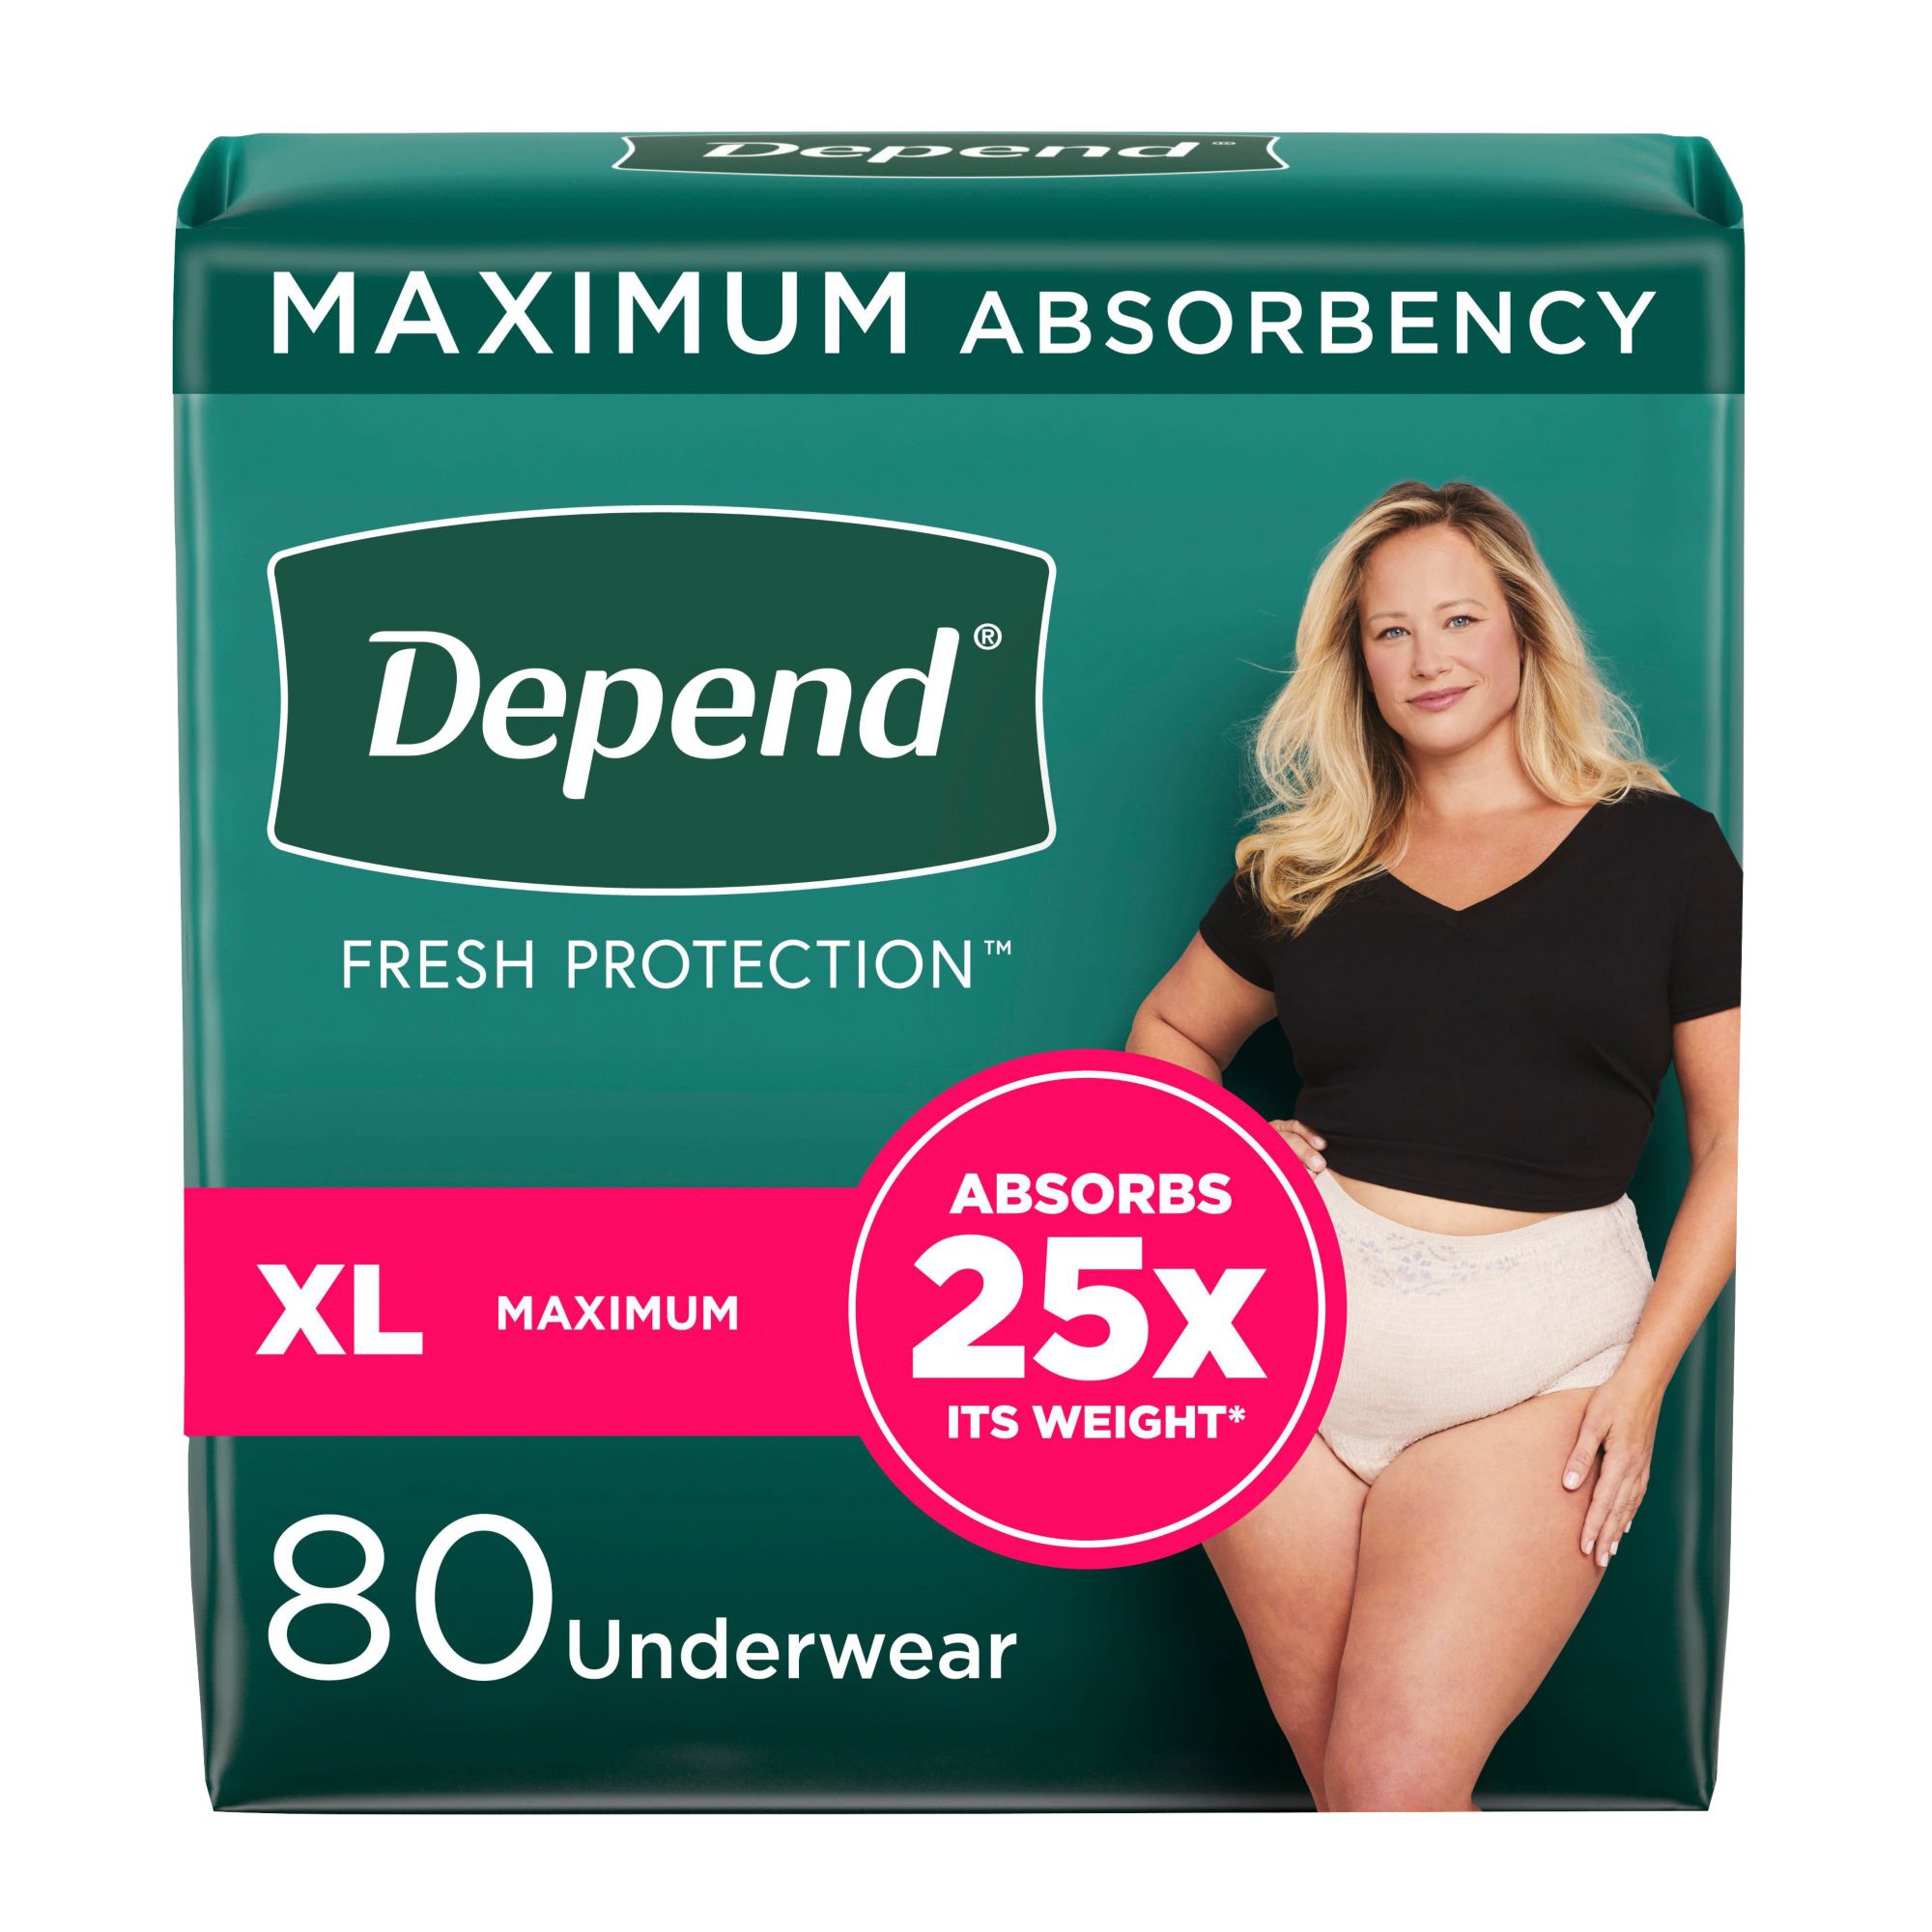 Save on Always Women's Discreet Boutique Incontinence Underwear Maximum L  Order Online Delivery